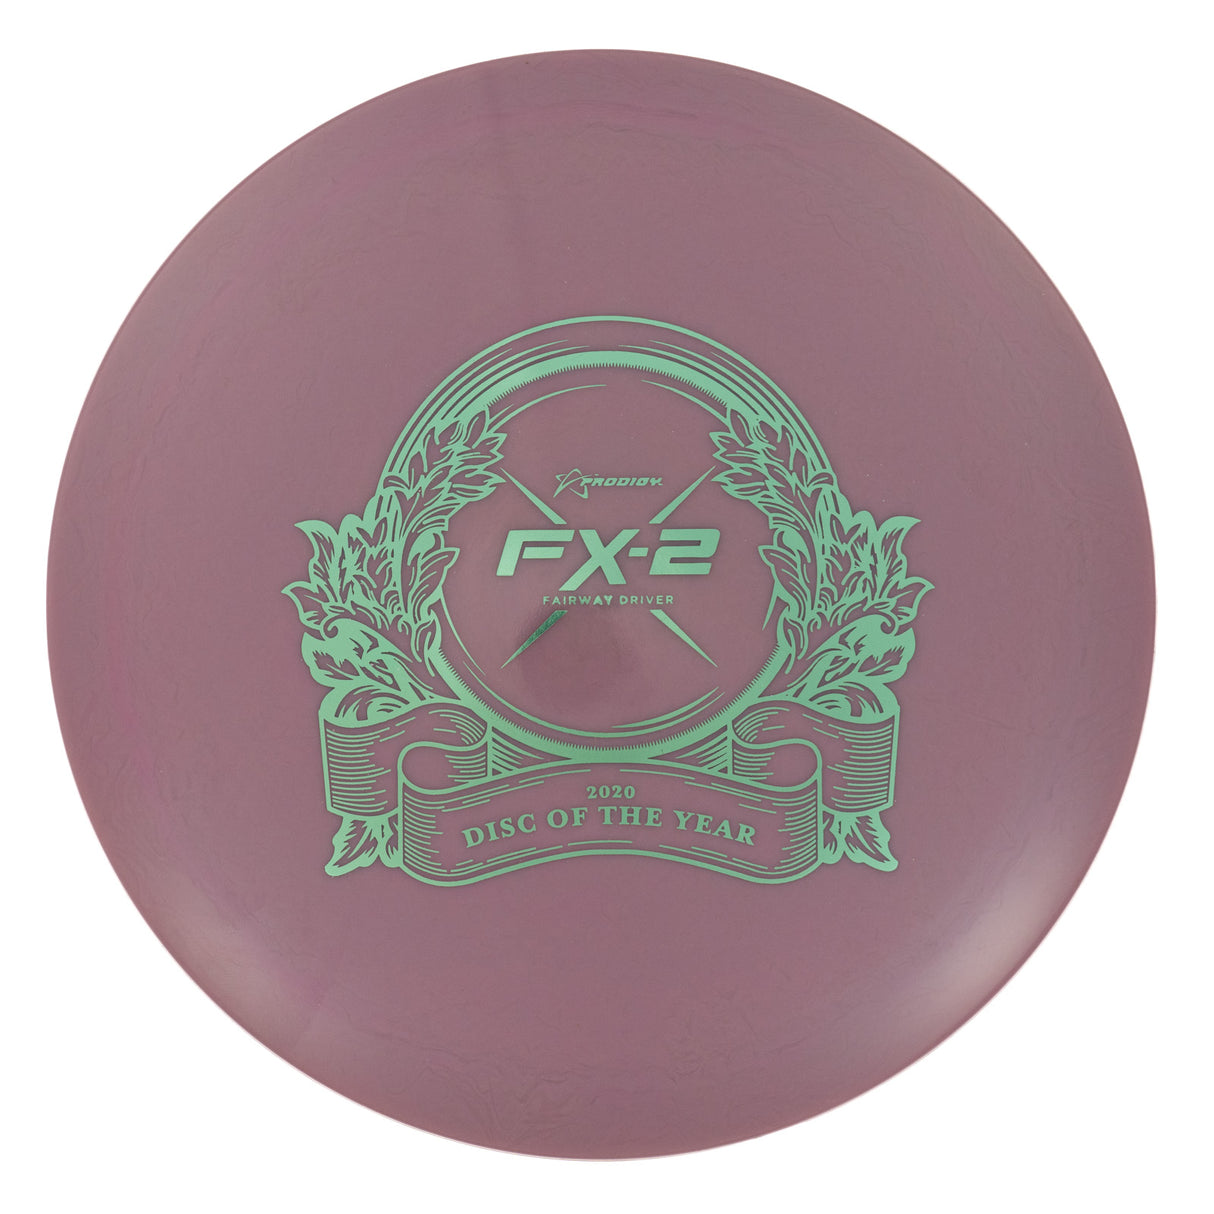 Prodigy FX-2 - 2020 Disc of the Year 400G 174g | Style 0002